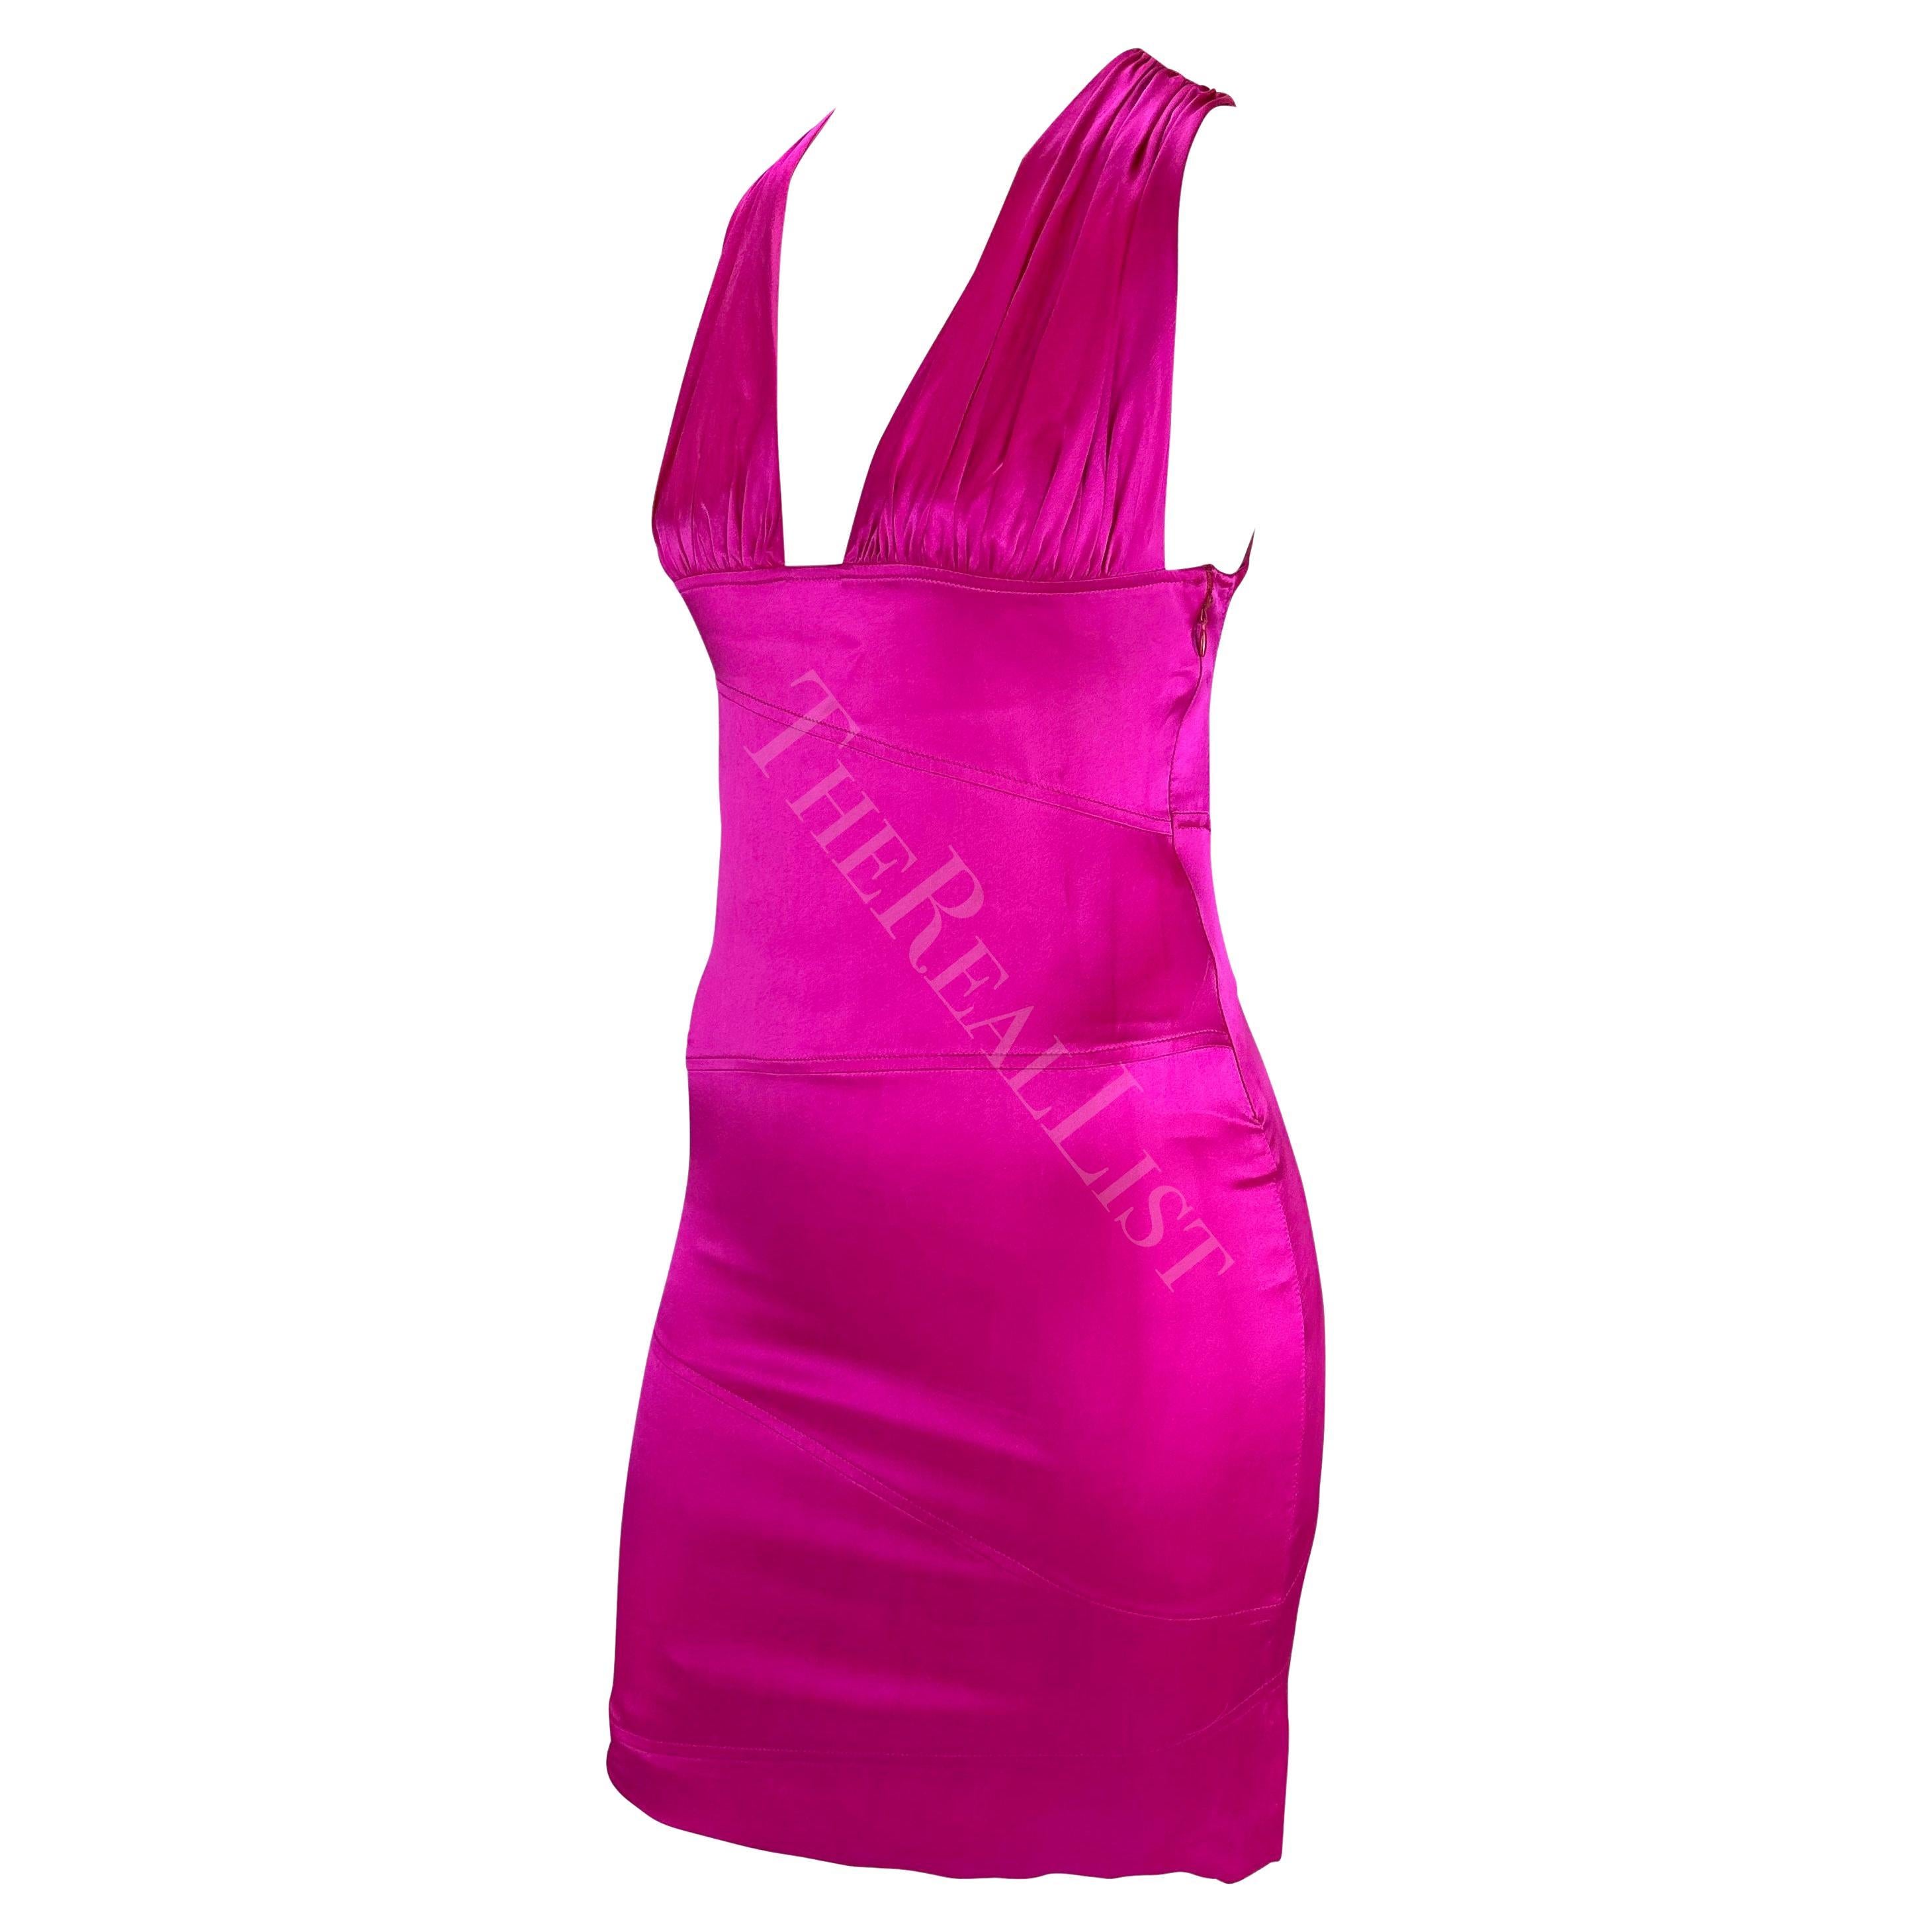 Presenting a striking hot pink backless bodycon dress designed by Donatella Versace for Versace's Fall/Winter 2004 collection. Ruching at the bust accentuates the sexy plunging neckline and asymmetric paneling perfectly hugs the body. Check out our